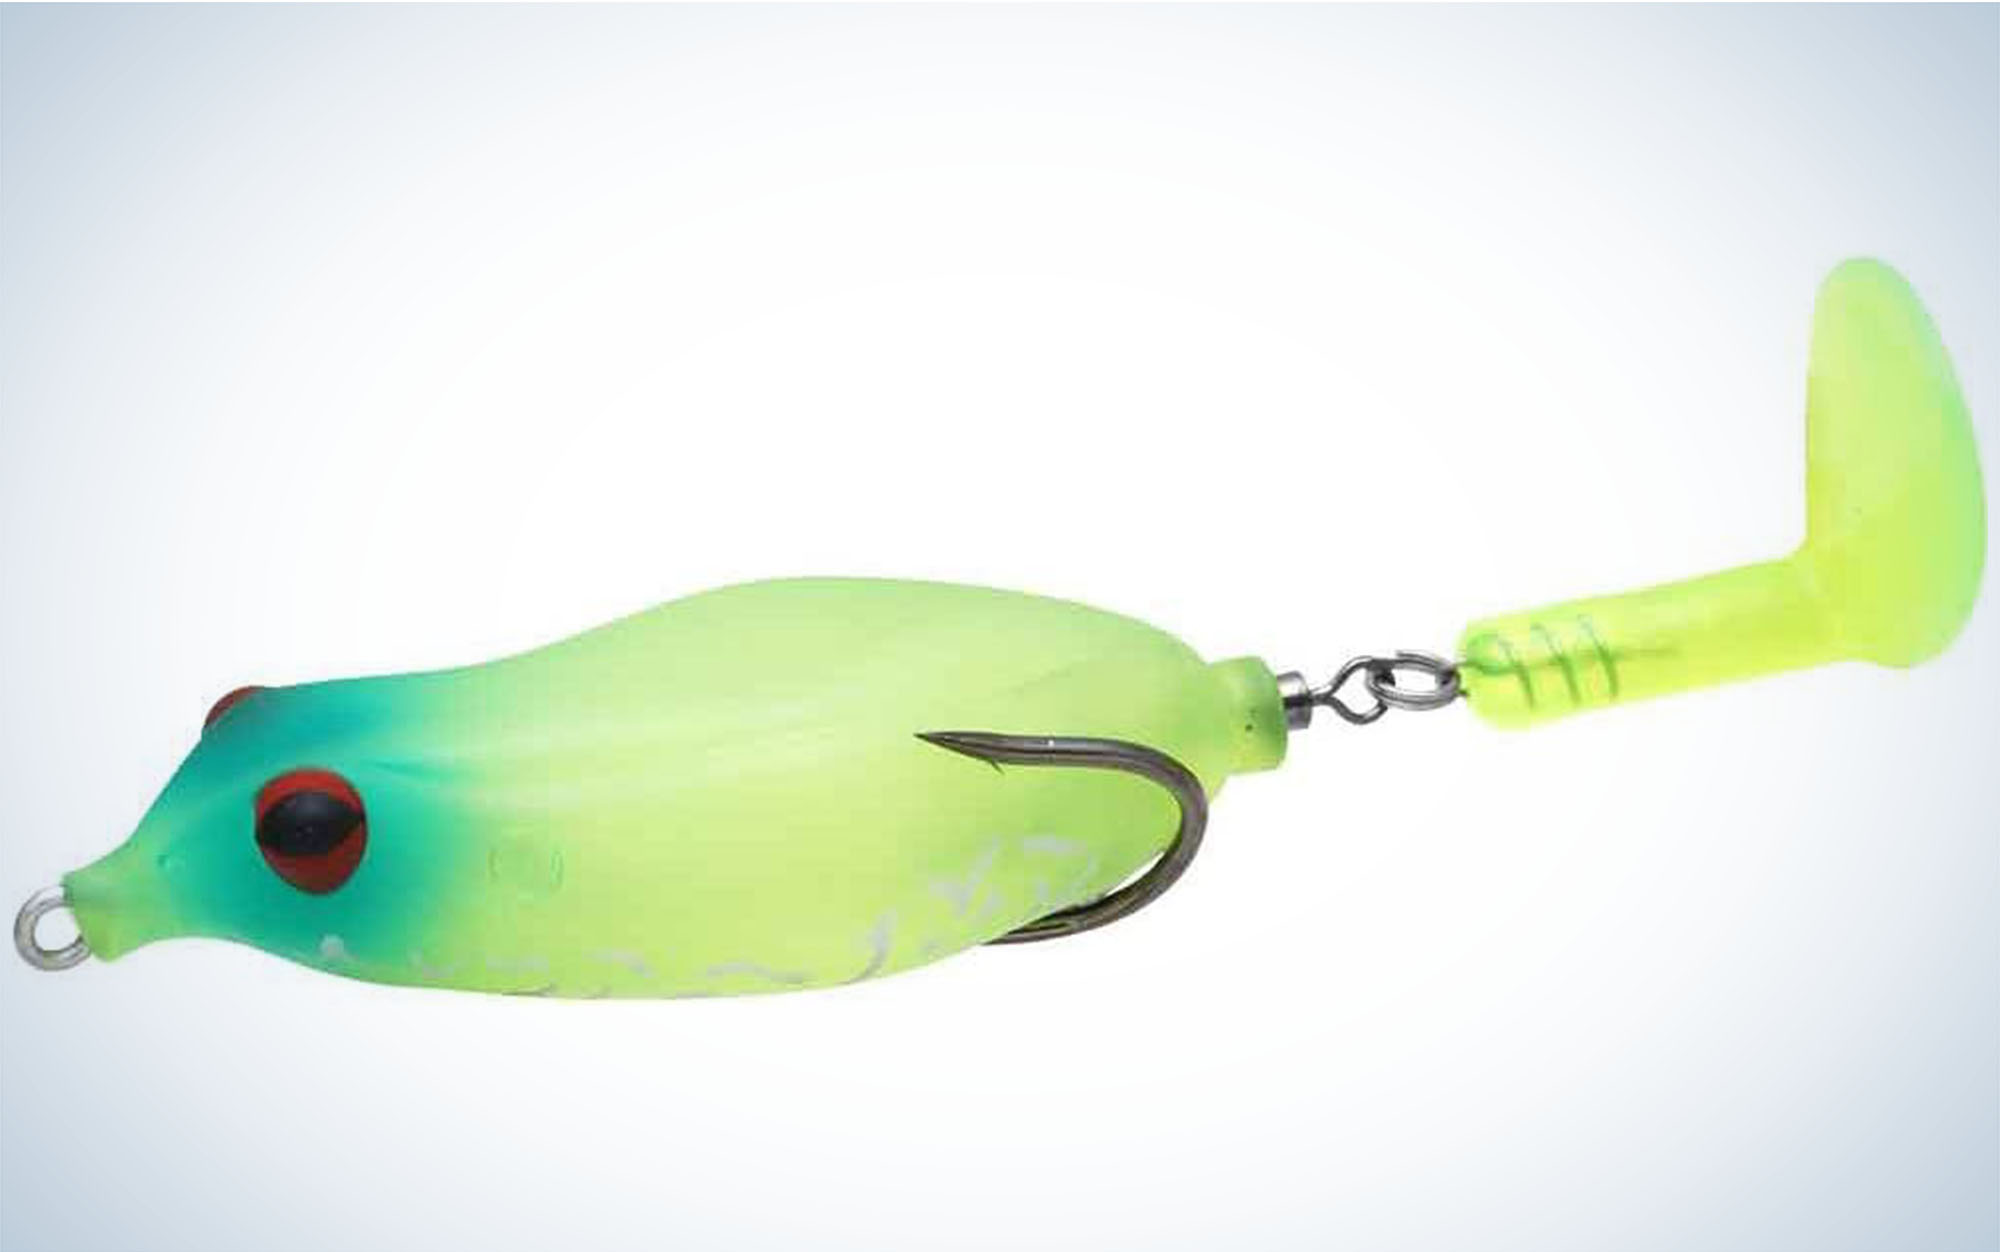 Soft Fishing Lures Jig Heads, Topwater Fishing Lures for Bass, T